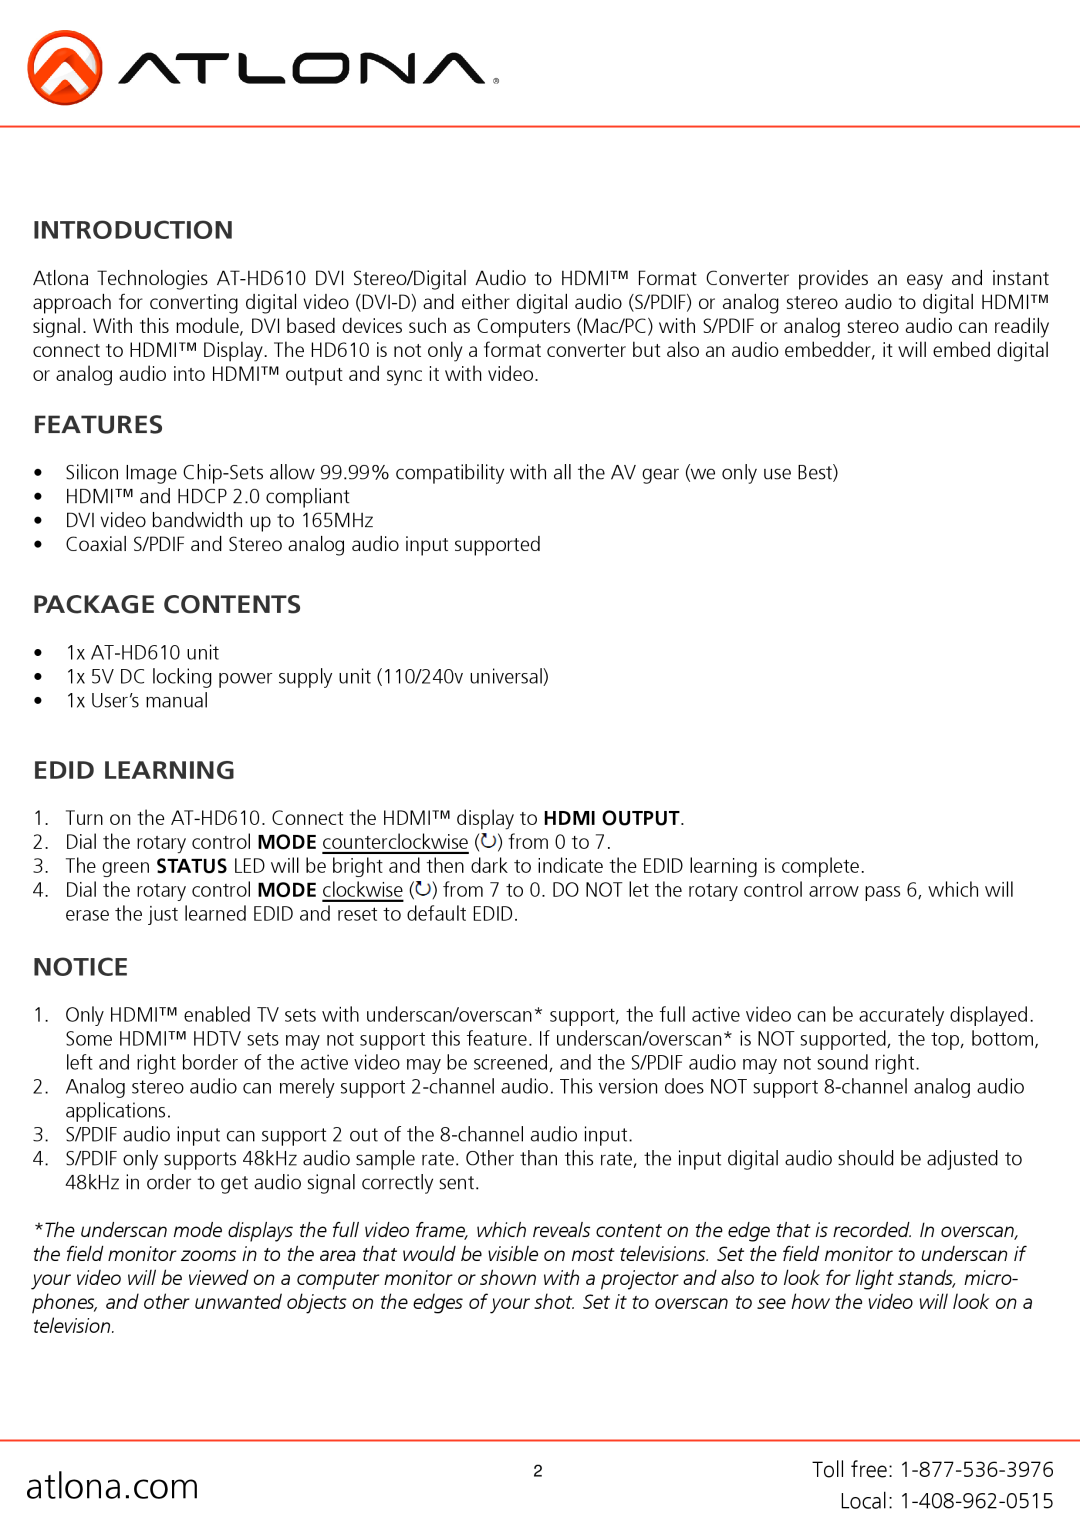 Atlona AT-HD610 user manual Introduction, Features, Package Contents, Edid Learning, atlona.com 